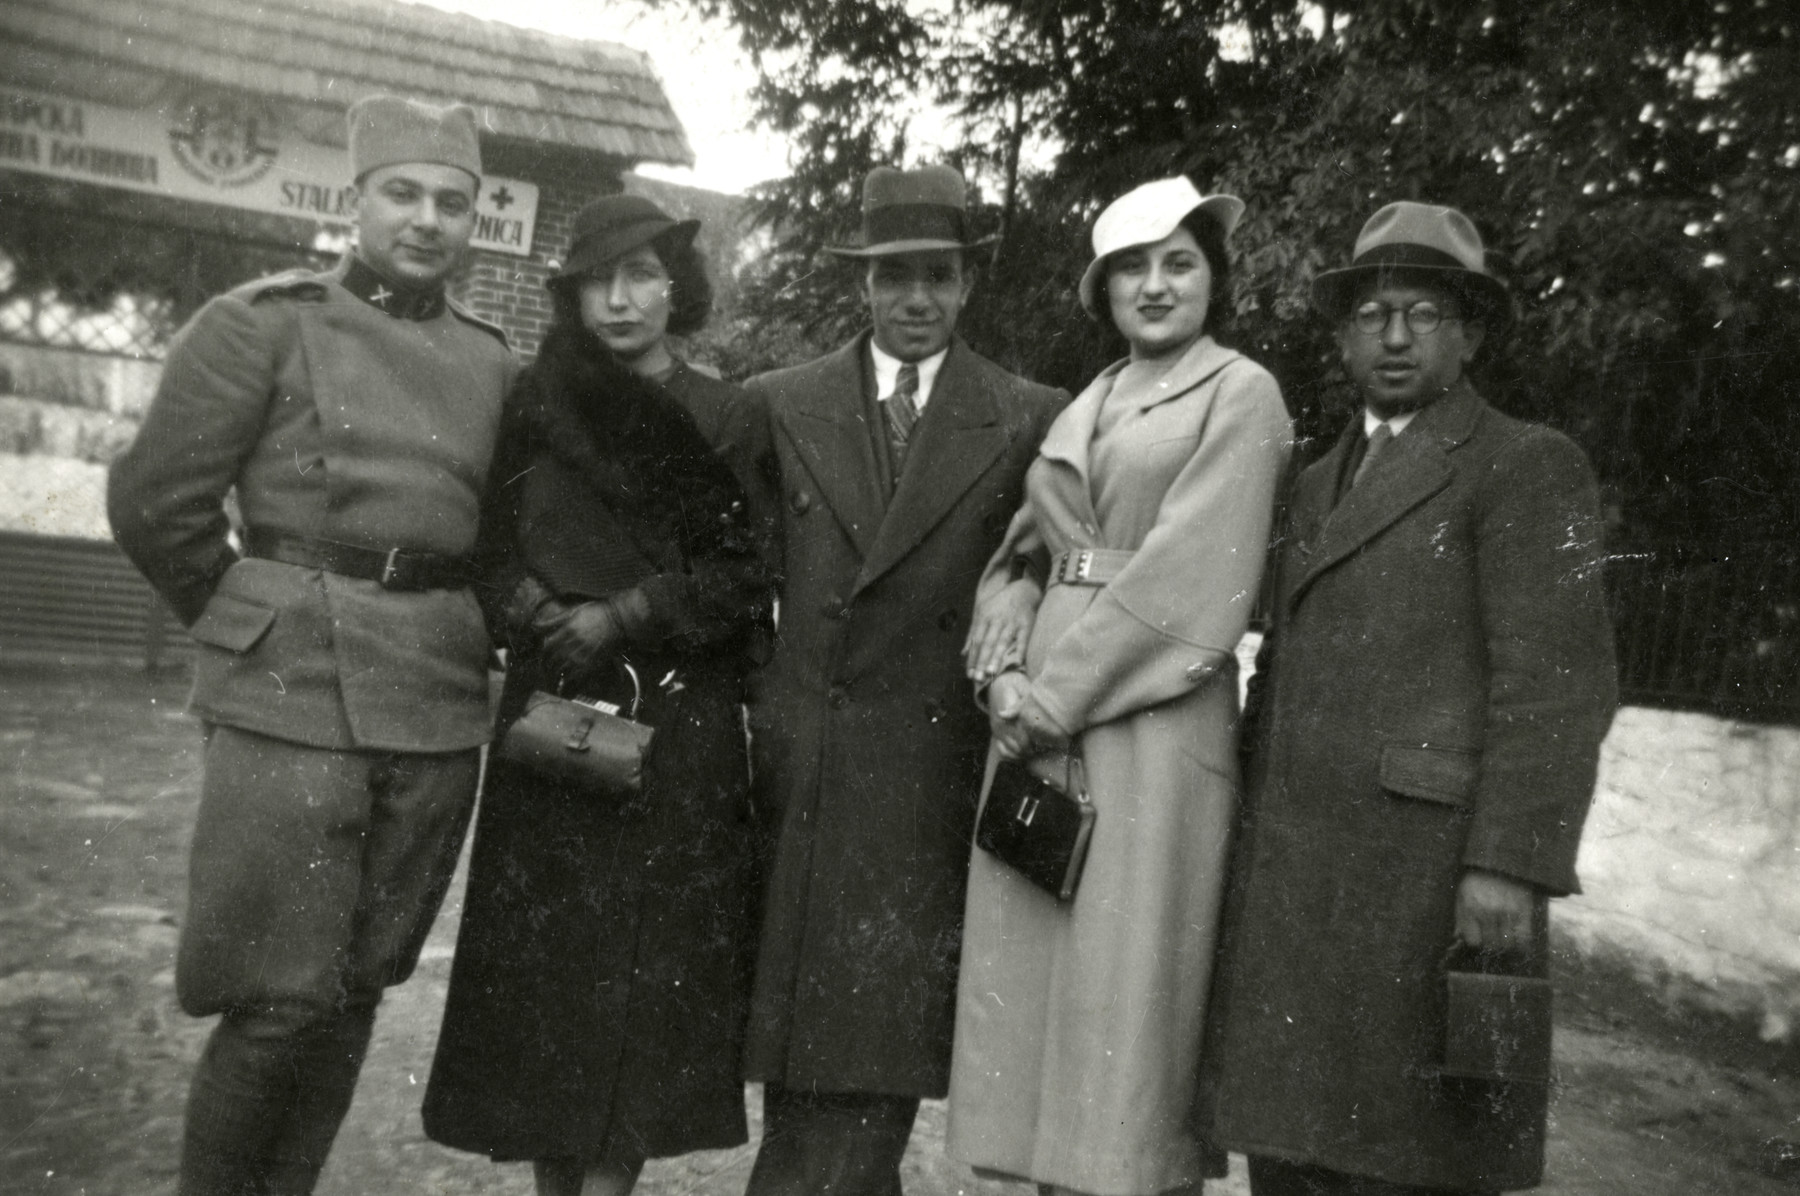 A group of Macedonian Jews poses in front of a hospital.

Pictured are Rabbi Cassorla (father of the donor, on right), his sister, a couple and a man in a uniform (who may be " Joseph Pappo", a Serbian friend)